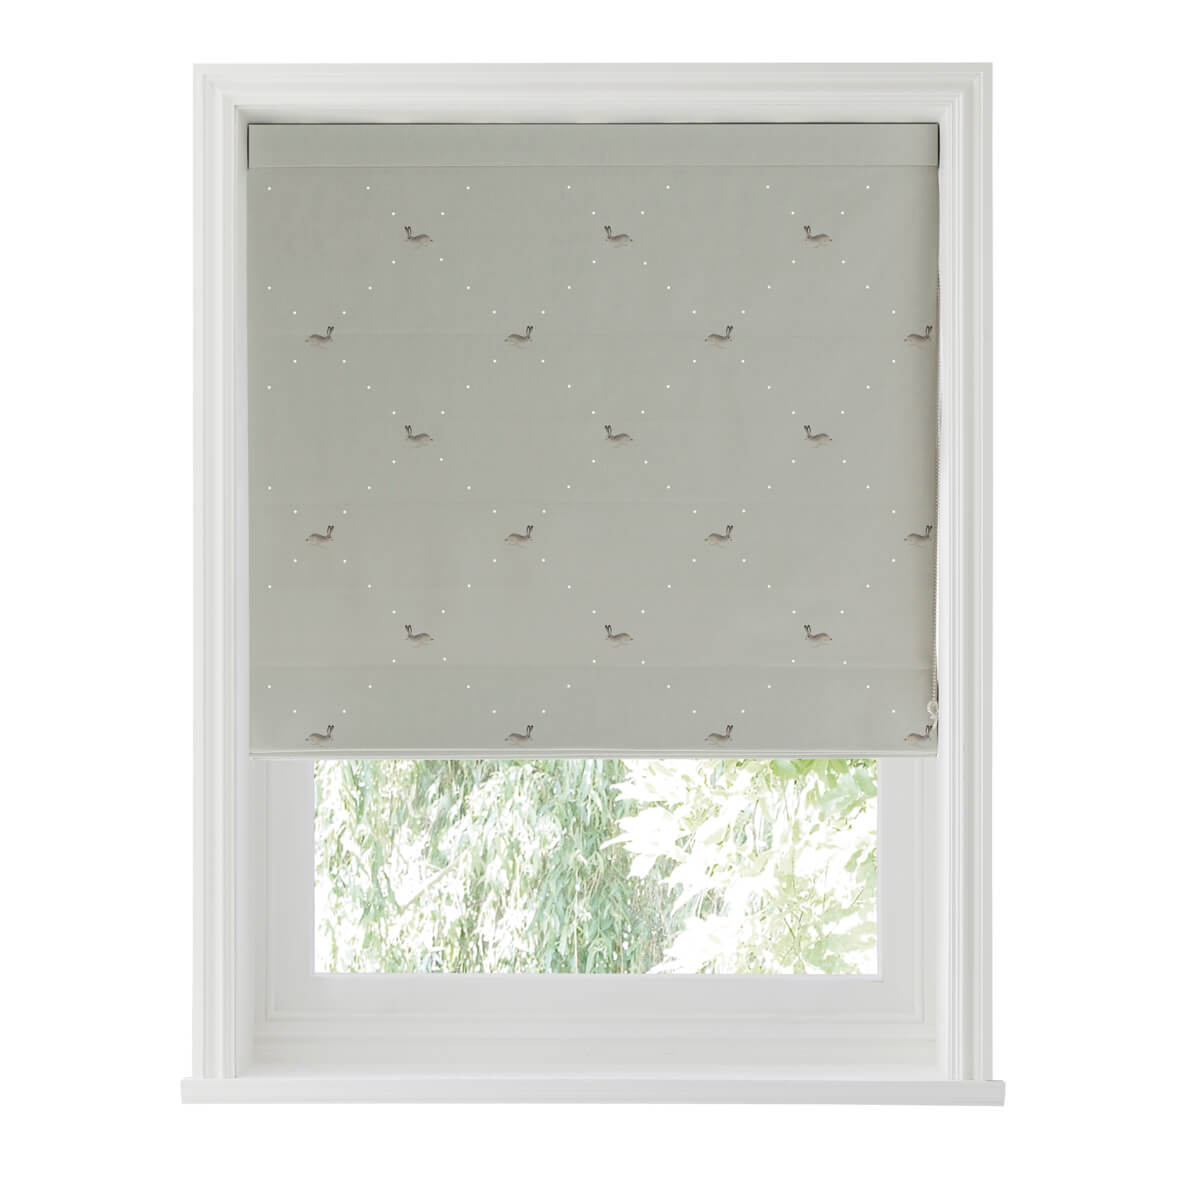 Details about   SOPHIE ALLPORT HARES ROMAN BLIND MADE TO MEASURE..ROTARY SAFETY PULL 